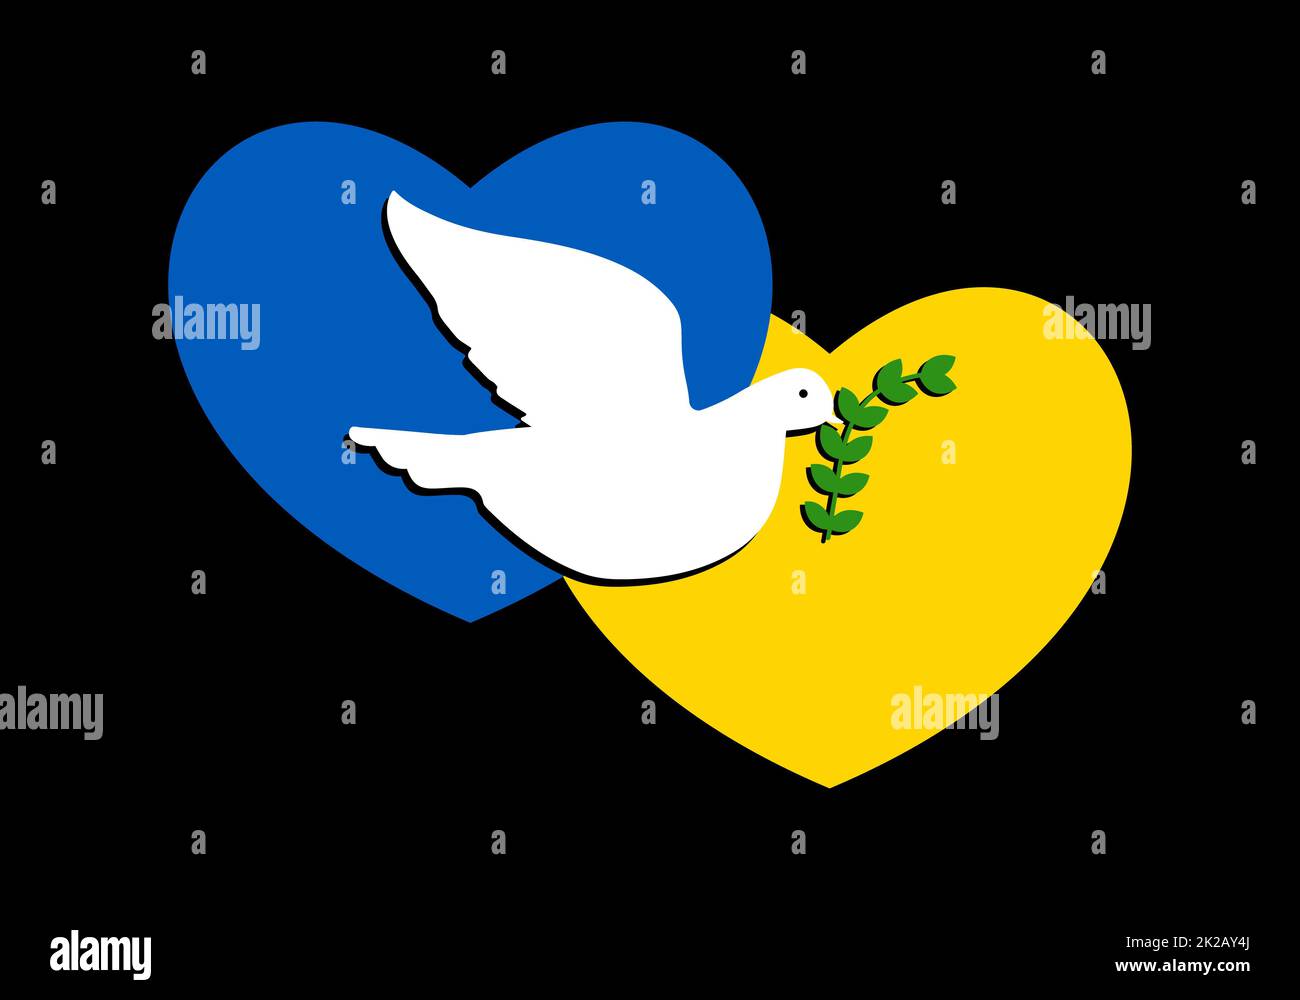 Abstract patriotic Ukrainian flag in the shape of a two hearts with the dove of peace. White dove flying and hold a olive branch of the peace. Fluttering bird that brings peaceful and calm to Ukraine. Stock Photo